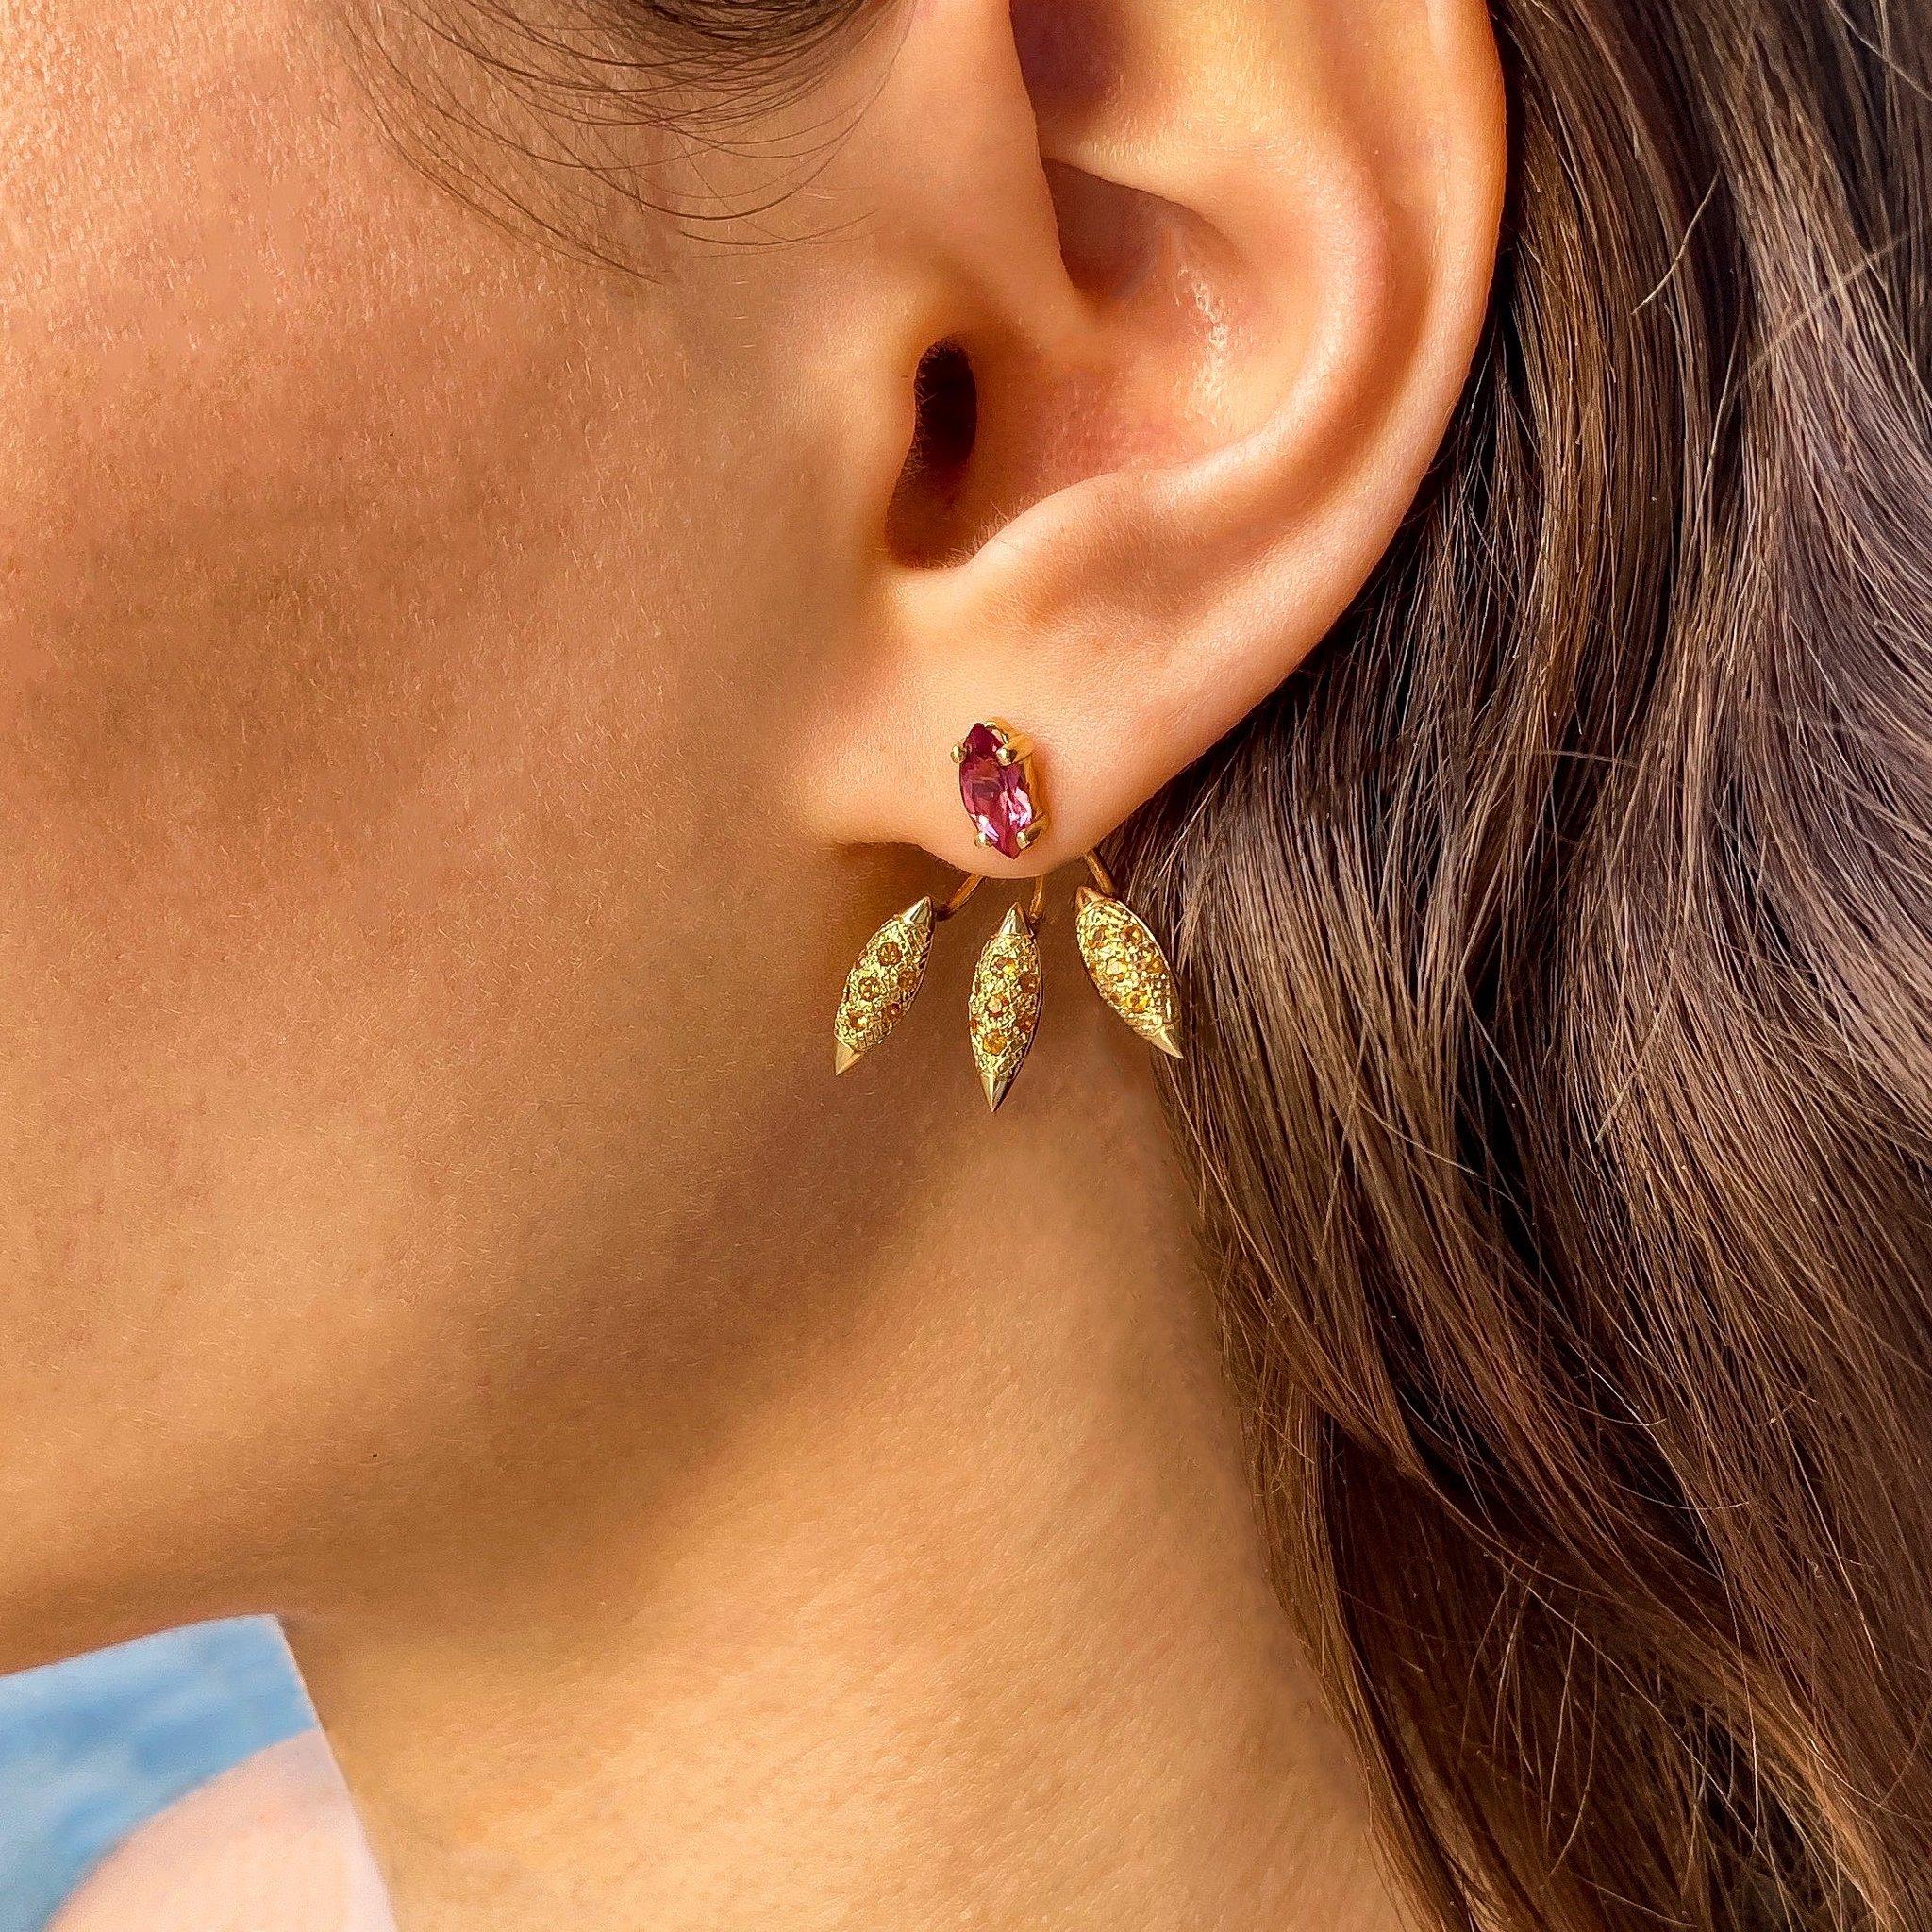 The ‘Grain’, ear jackets are crafted in 18K gold hallmarked in Cyprus. These impressive three part sculptural earrings come in a highly polished finish and feature a pair of marquis cut, Rubellite Garnets totaling 0,8 Cts that can be worn as an